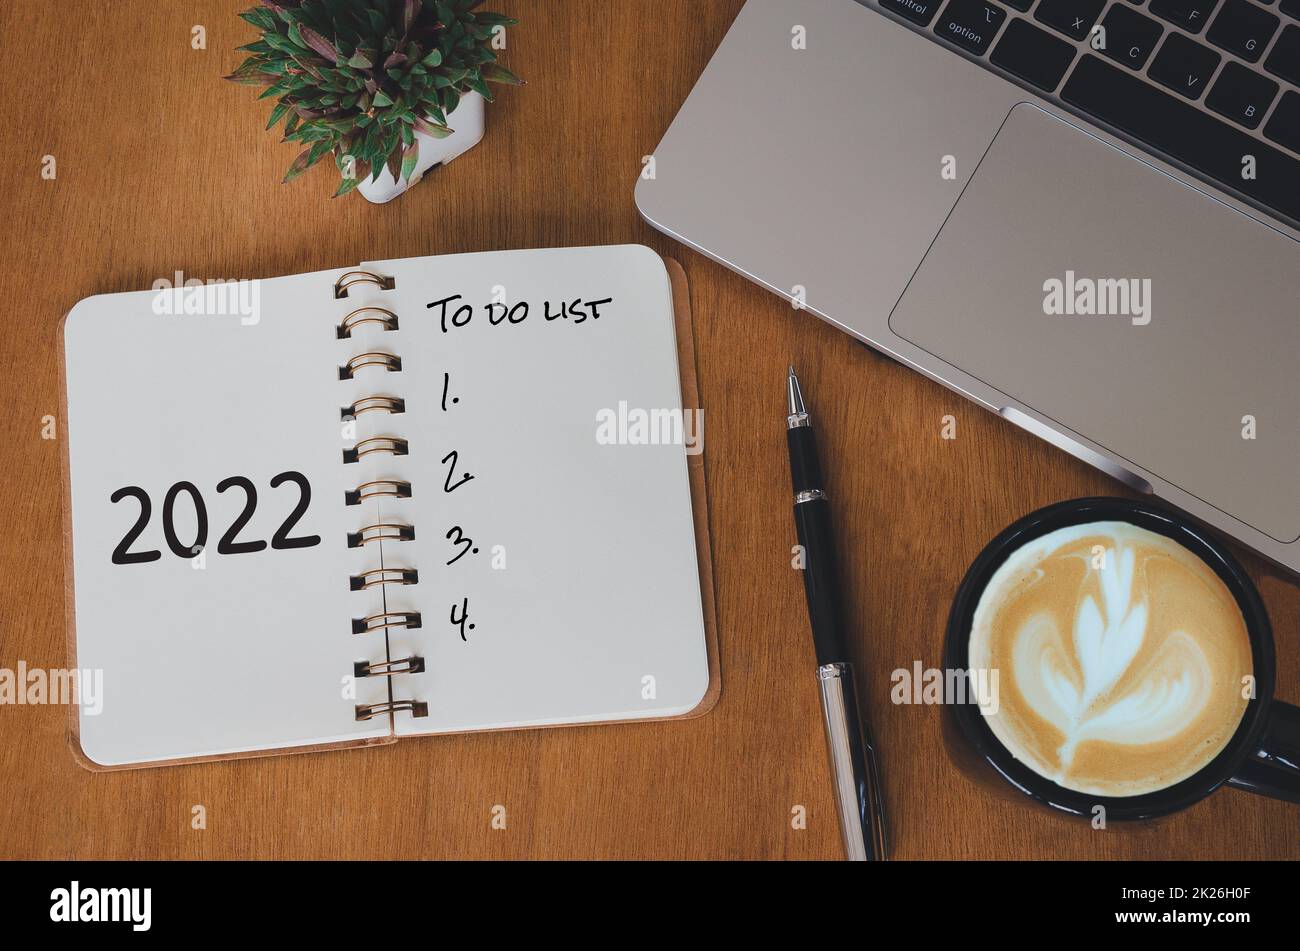 computer laptop Notebook and pen and cactus with coffee cup on desk.Top view to do list 2022 new year. Stock Photo